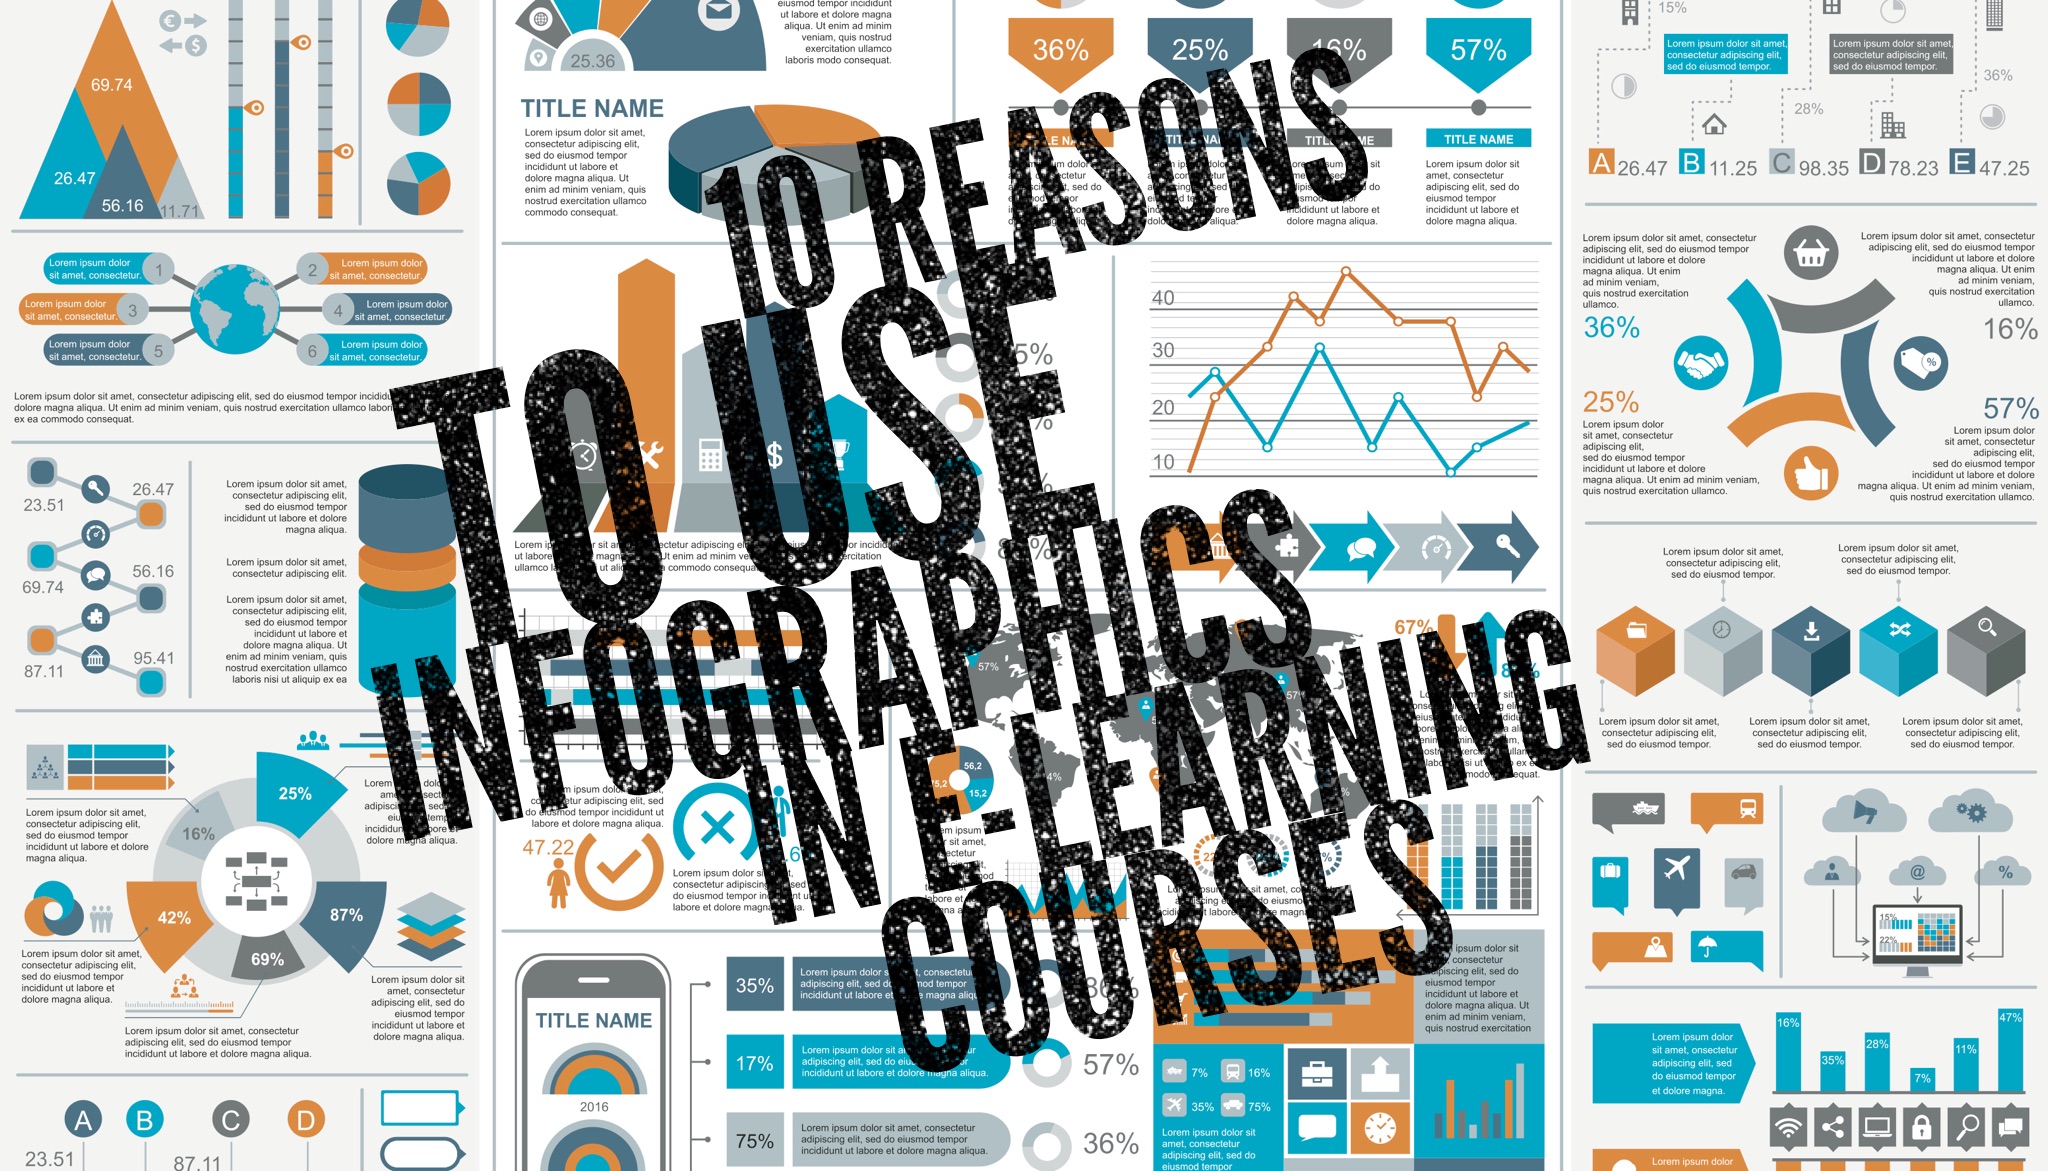 10 reason to use infographics in e learning